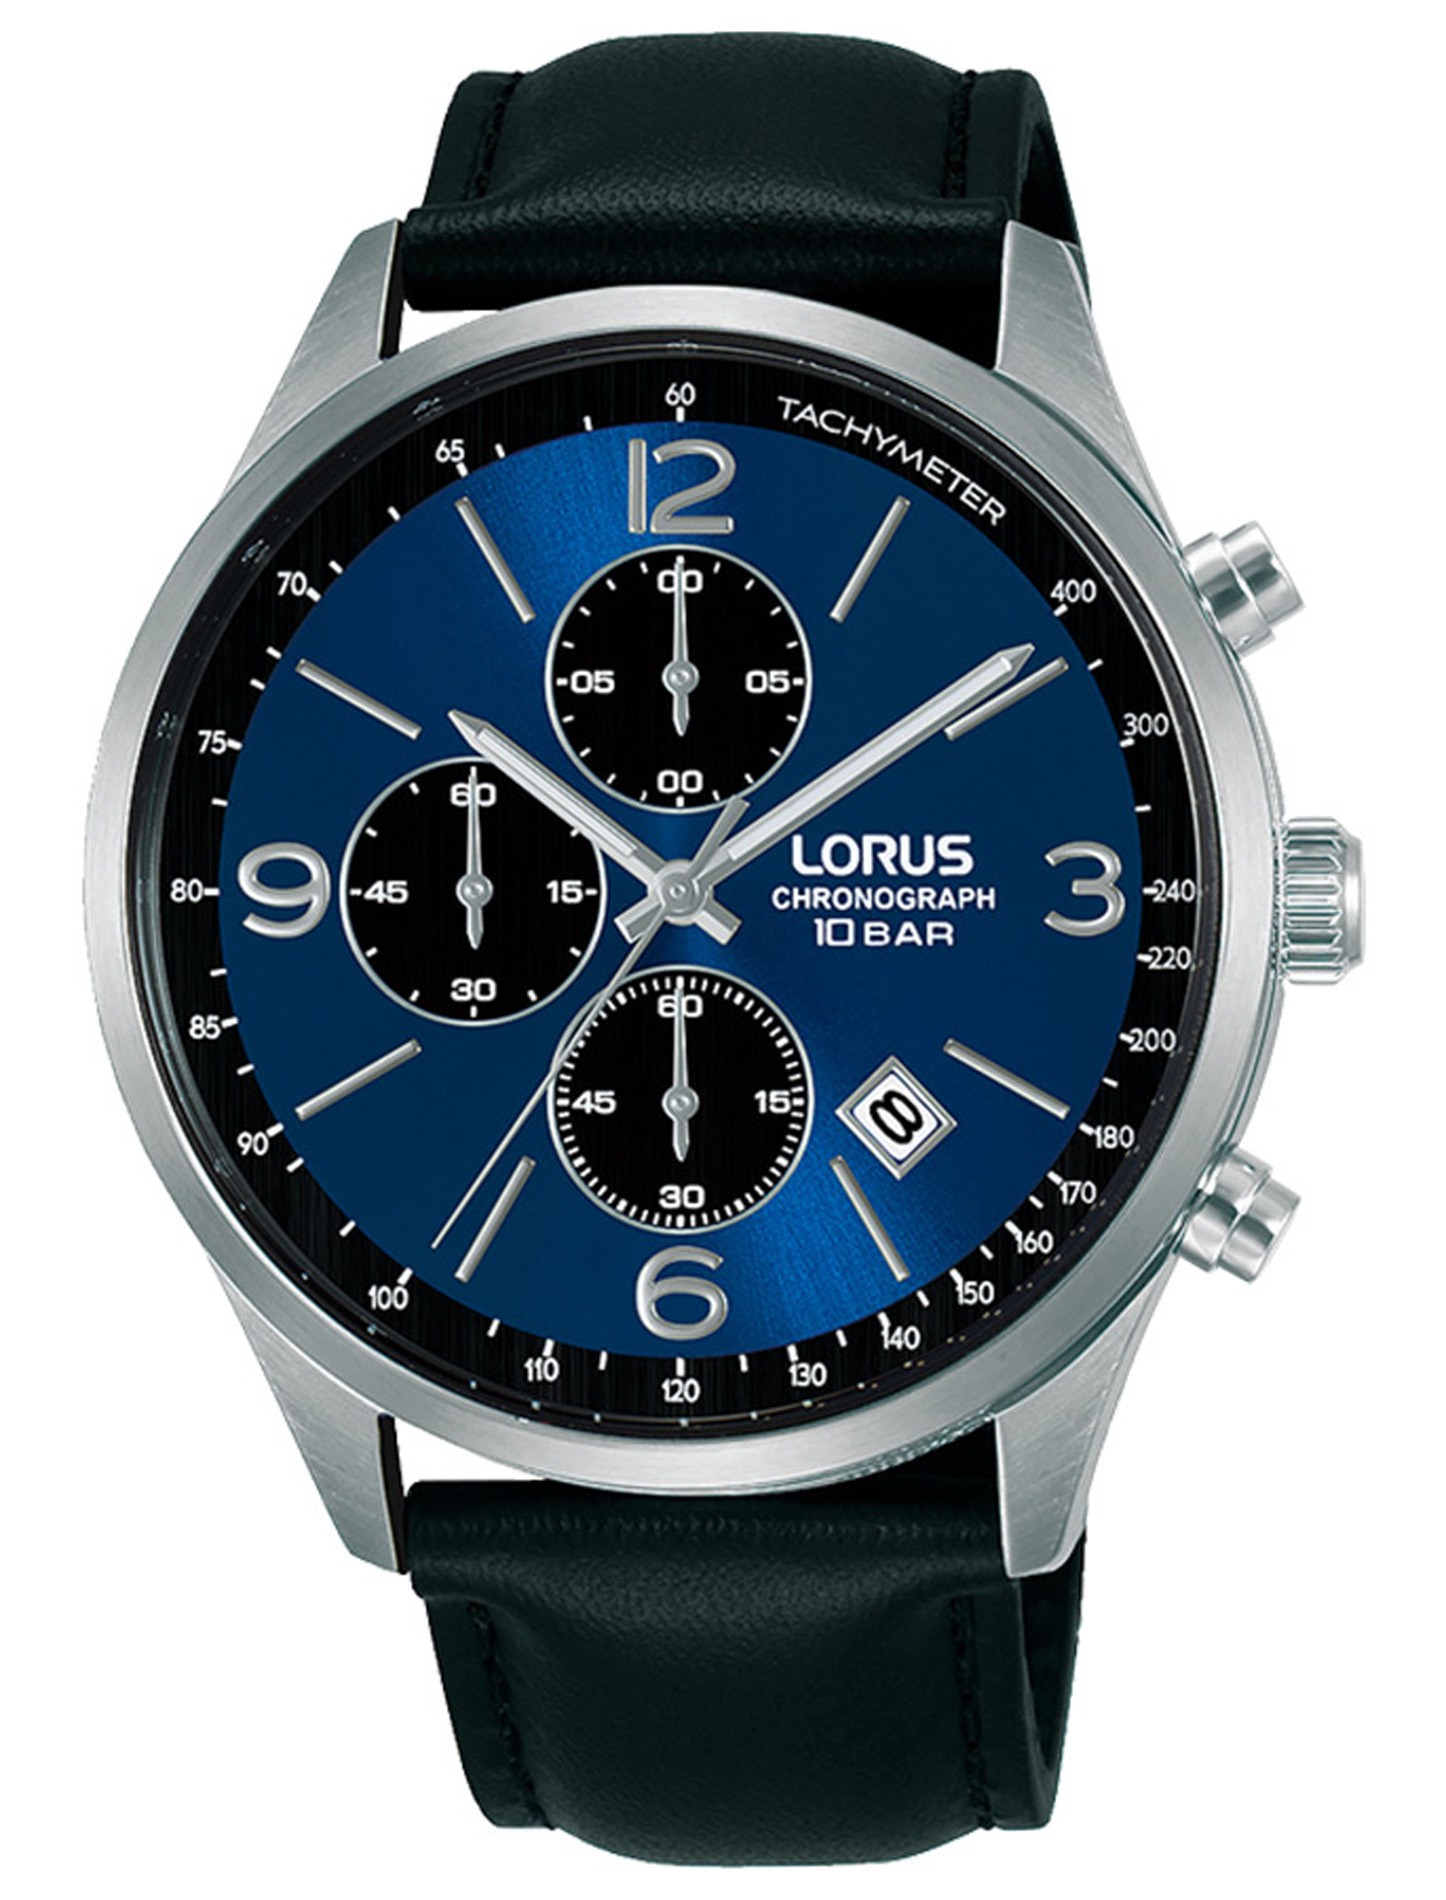 Lorus Men\'s Watch Stainless and Dial Blue RM319HX9 Steel Black Lorus 152286 Strap Lorus Comprar 152286 Watch With Stainless | Dark With Leather Strap and Black Dial Dark Man Sunray Watch Blue Classic Classic Sunray Man Watch Steel Leather